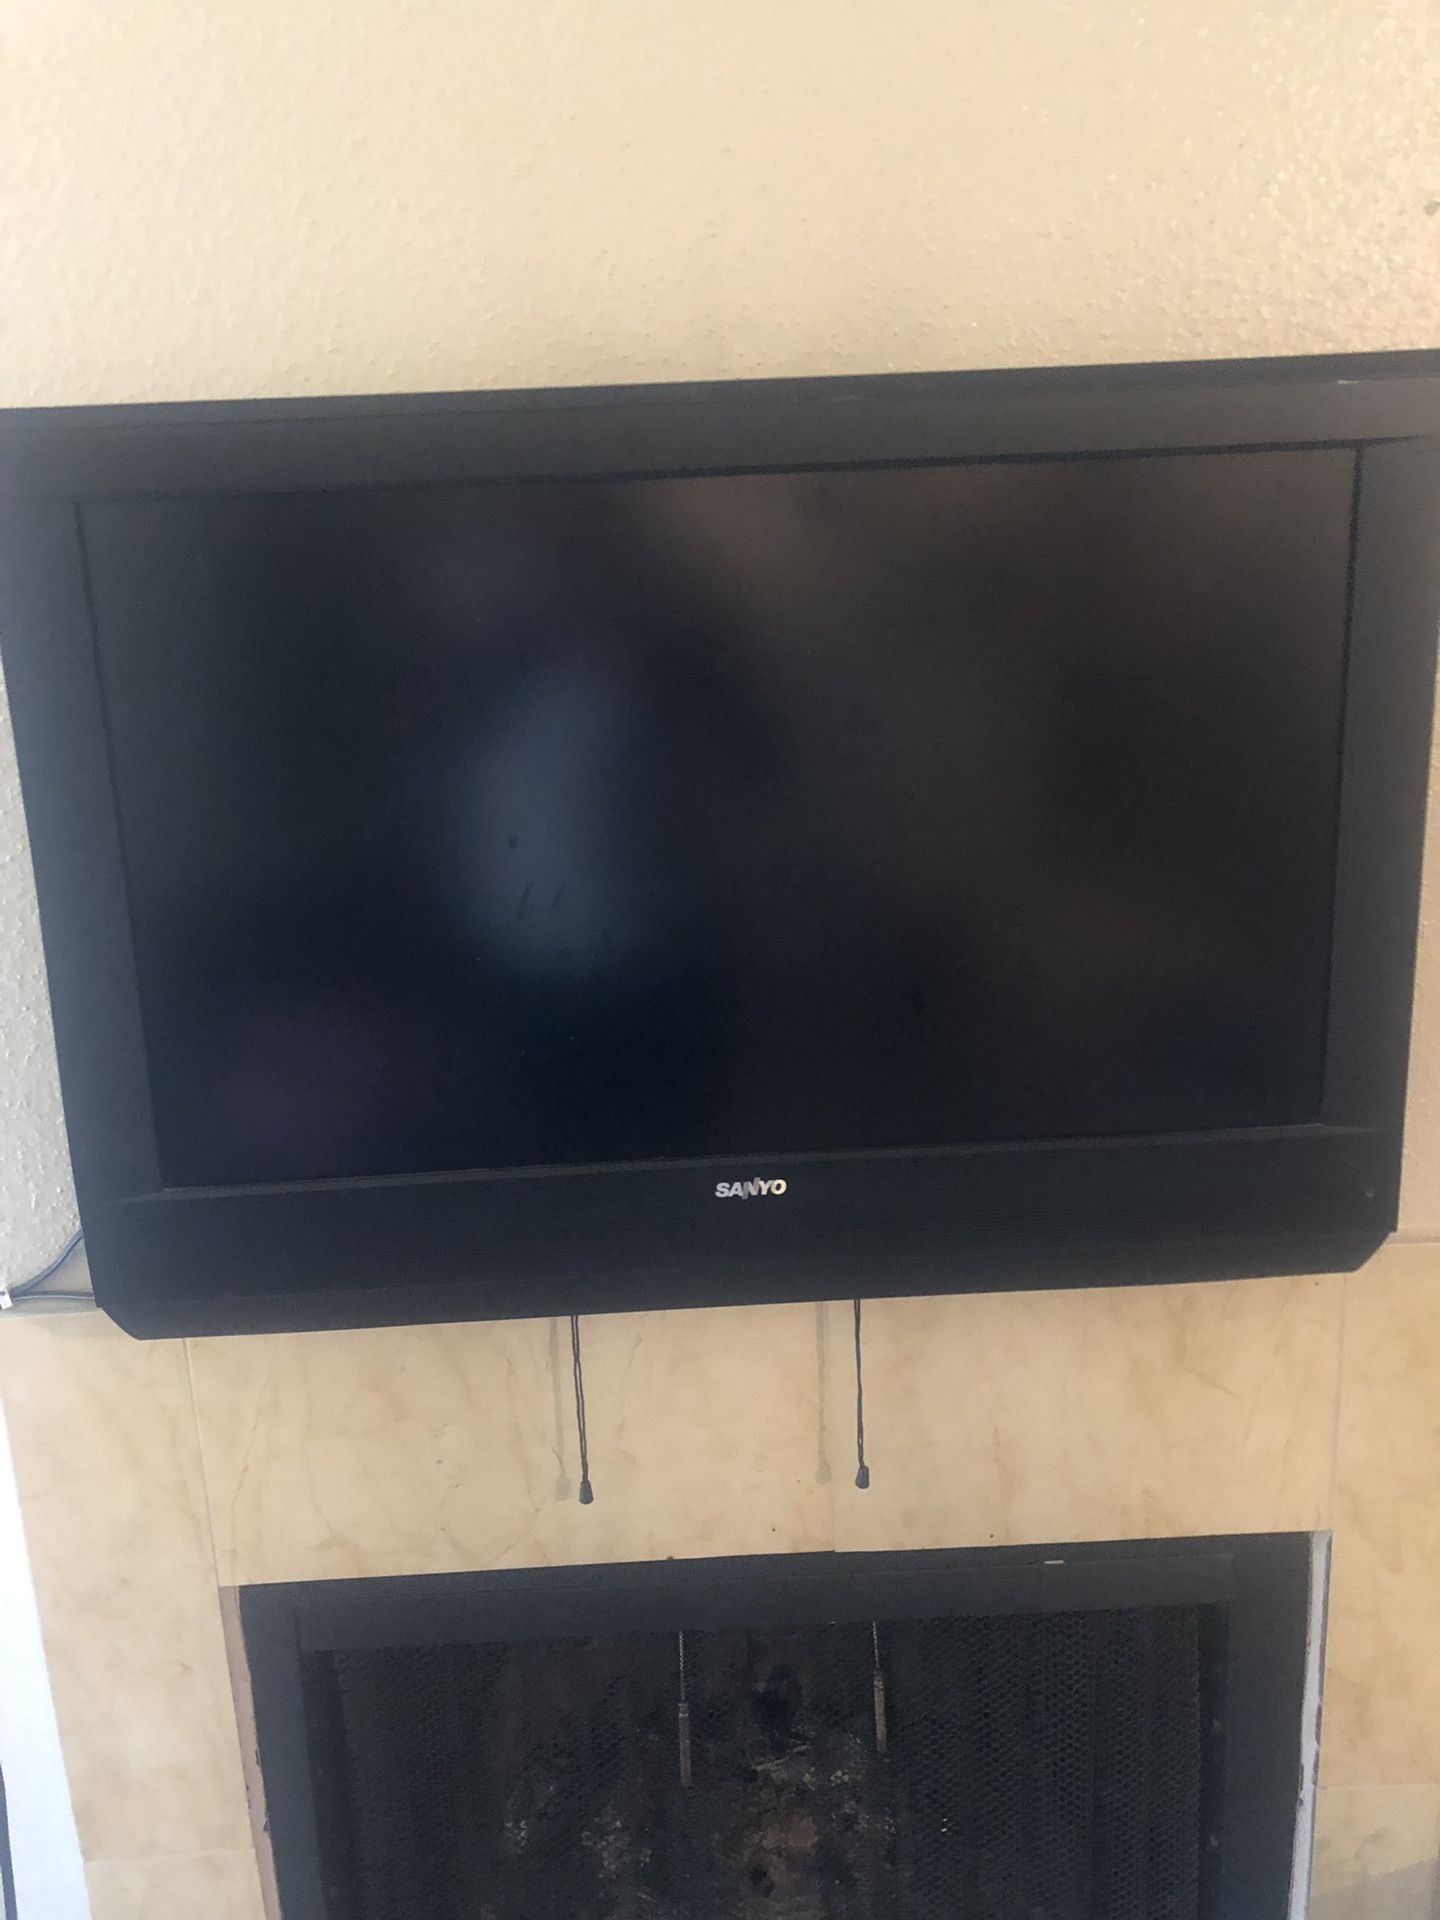 (2) 32 inch Sanyo TVs Each for 60$ Both 100$